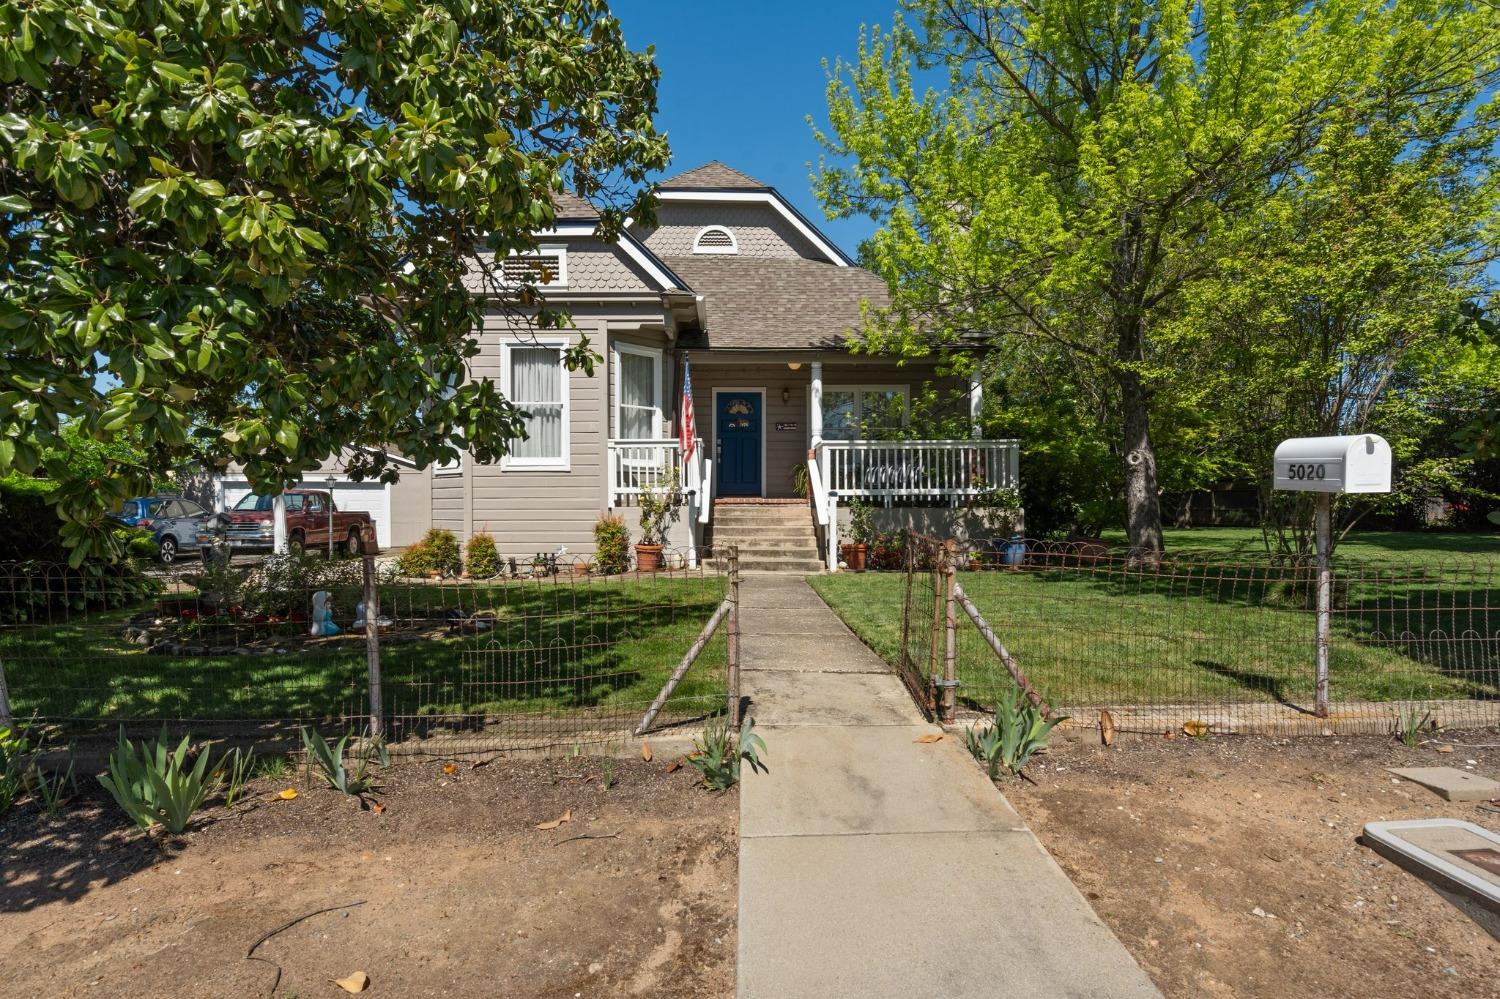 Photo of 5020 3rd St in Rocklin, CA